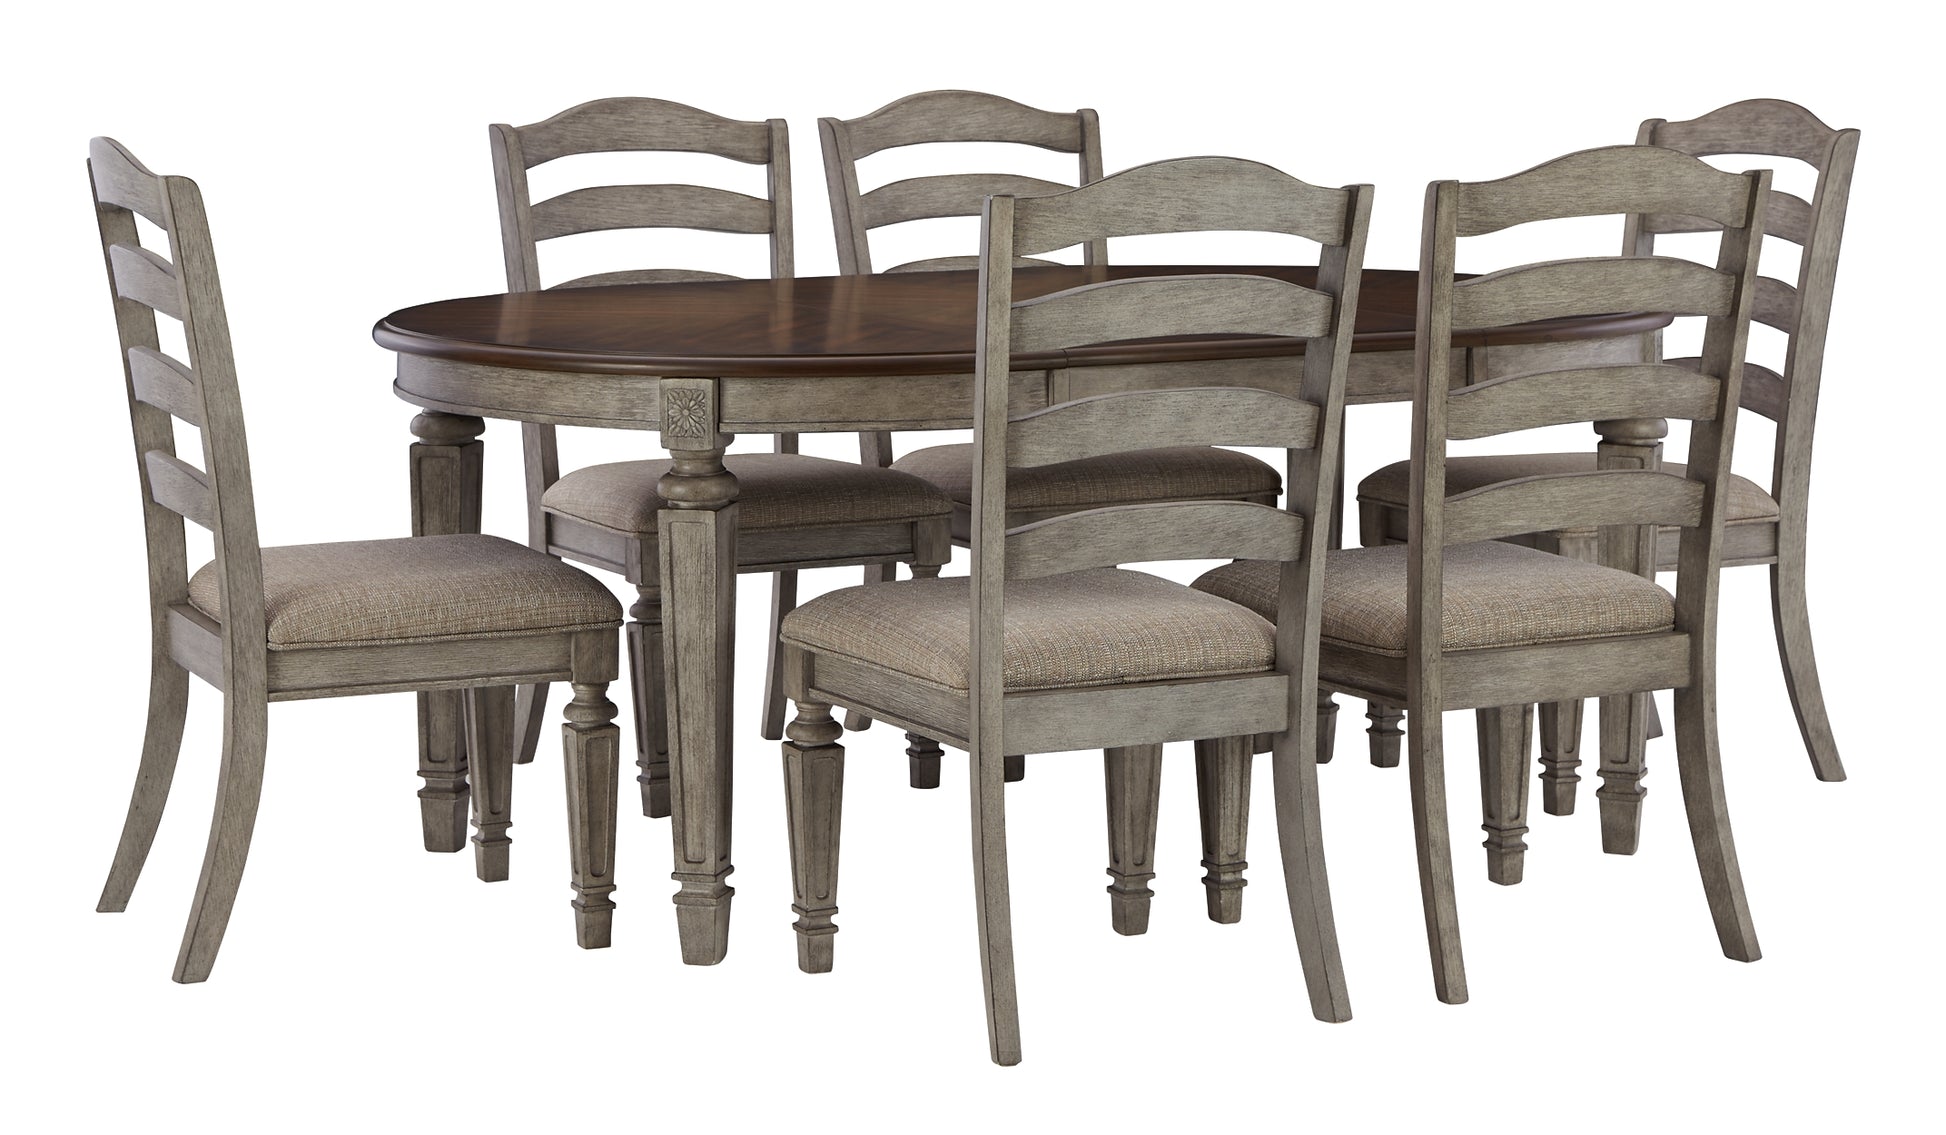 Lodenbay Dining Table and 6 Chairs Wilson Furniture (OH)  in Bridgeport, Ohio. Serving Bridgeport, Yorkville, Bellaire, & Avondale